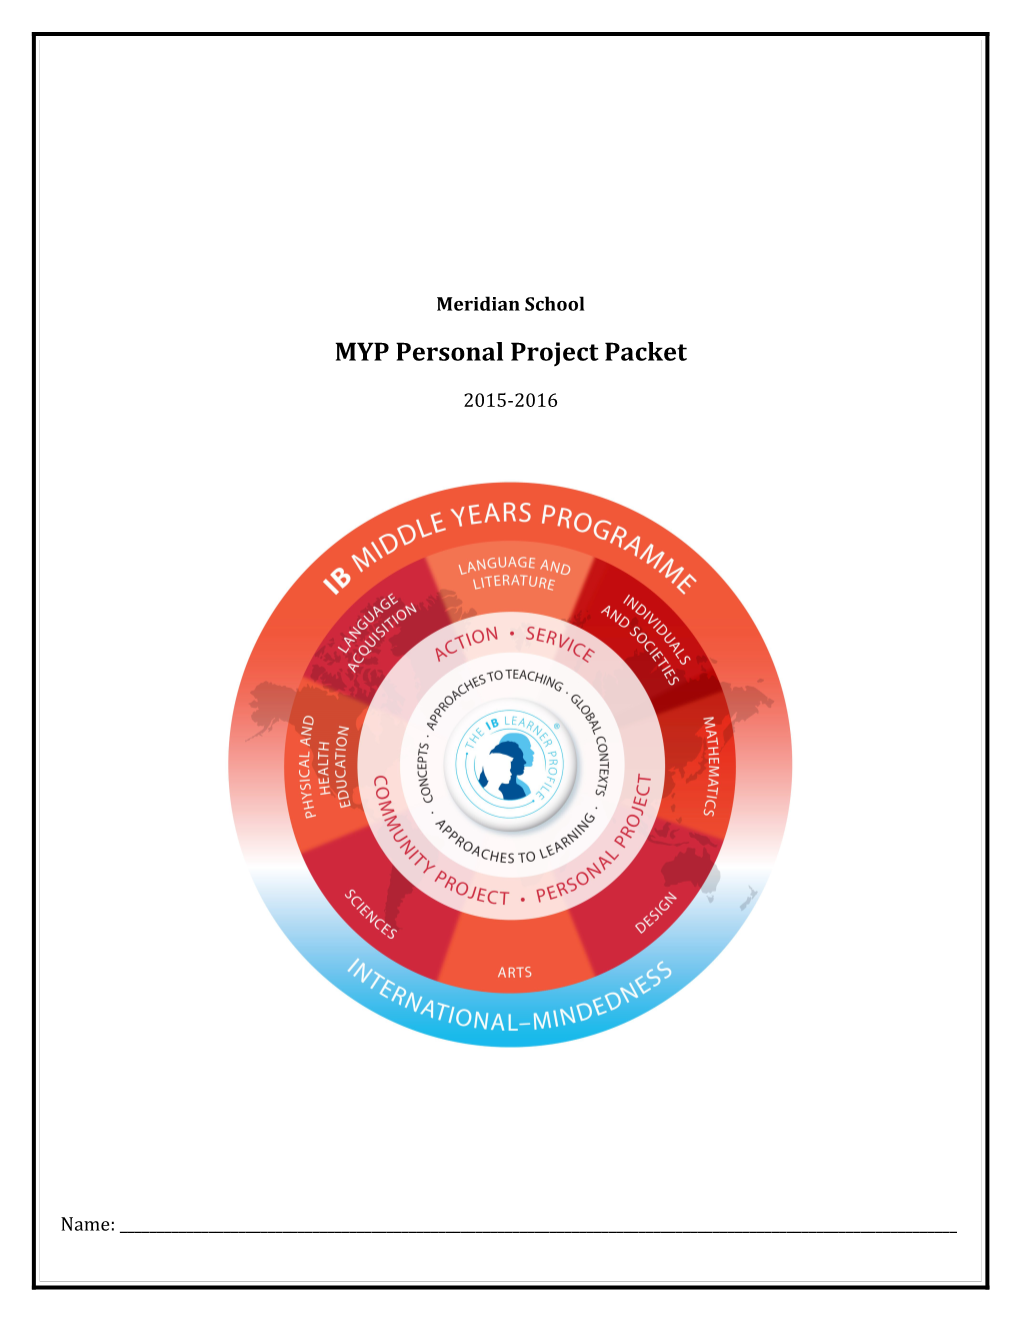 MYP Personal Project Packet